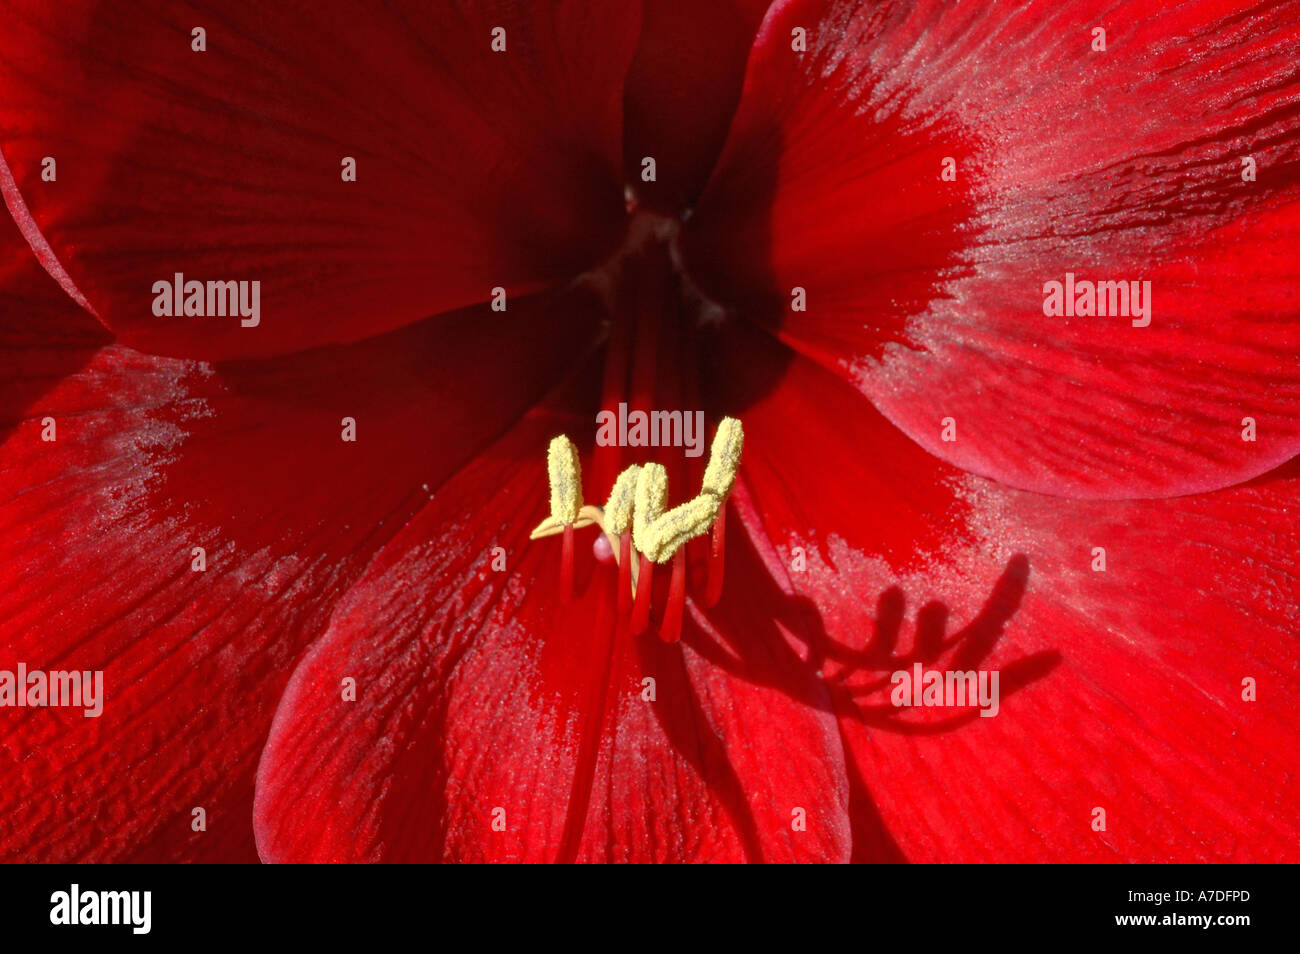 A detailed close up of the inside of a flower of amaryllis Stock Photo